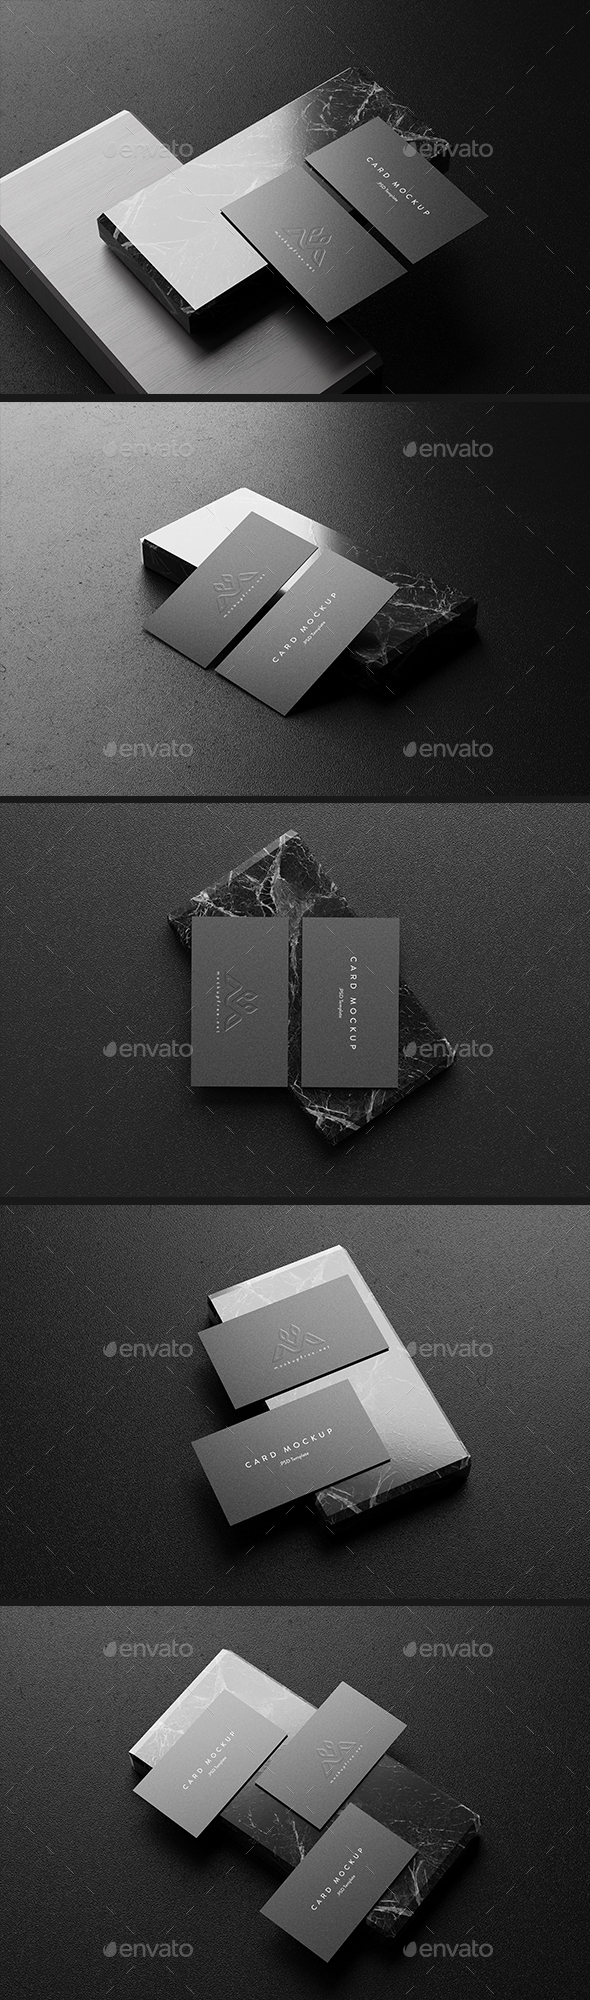 Business Cards on a Marble Block Mockups